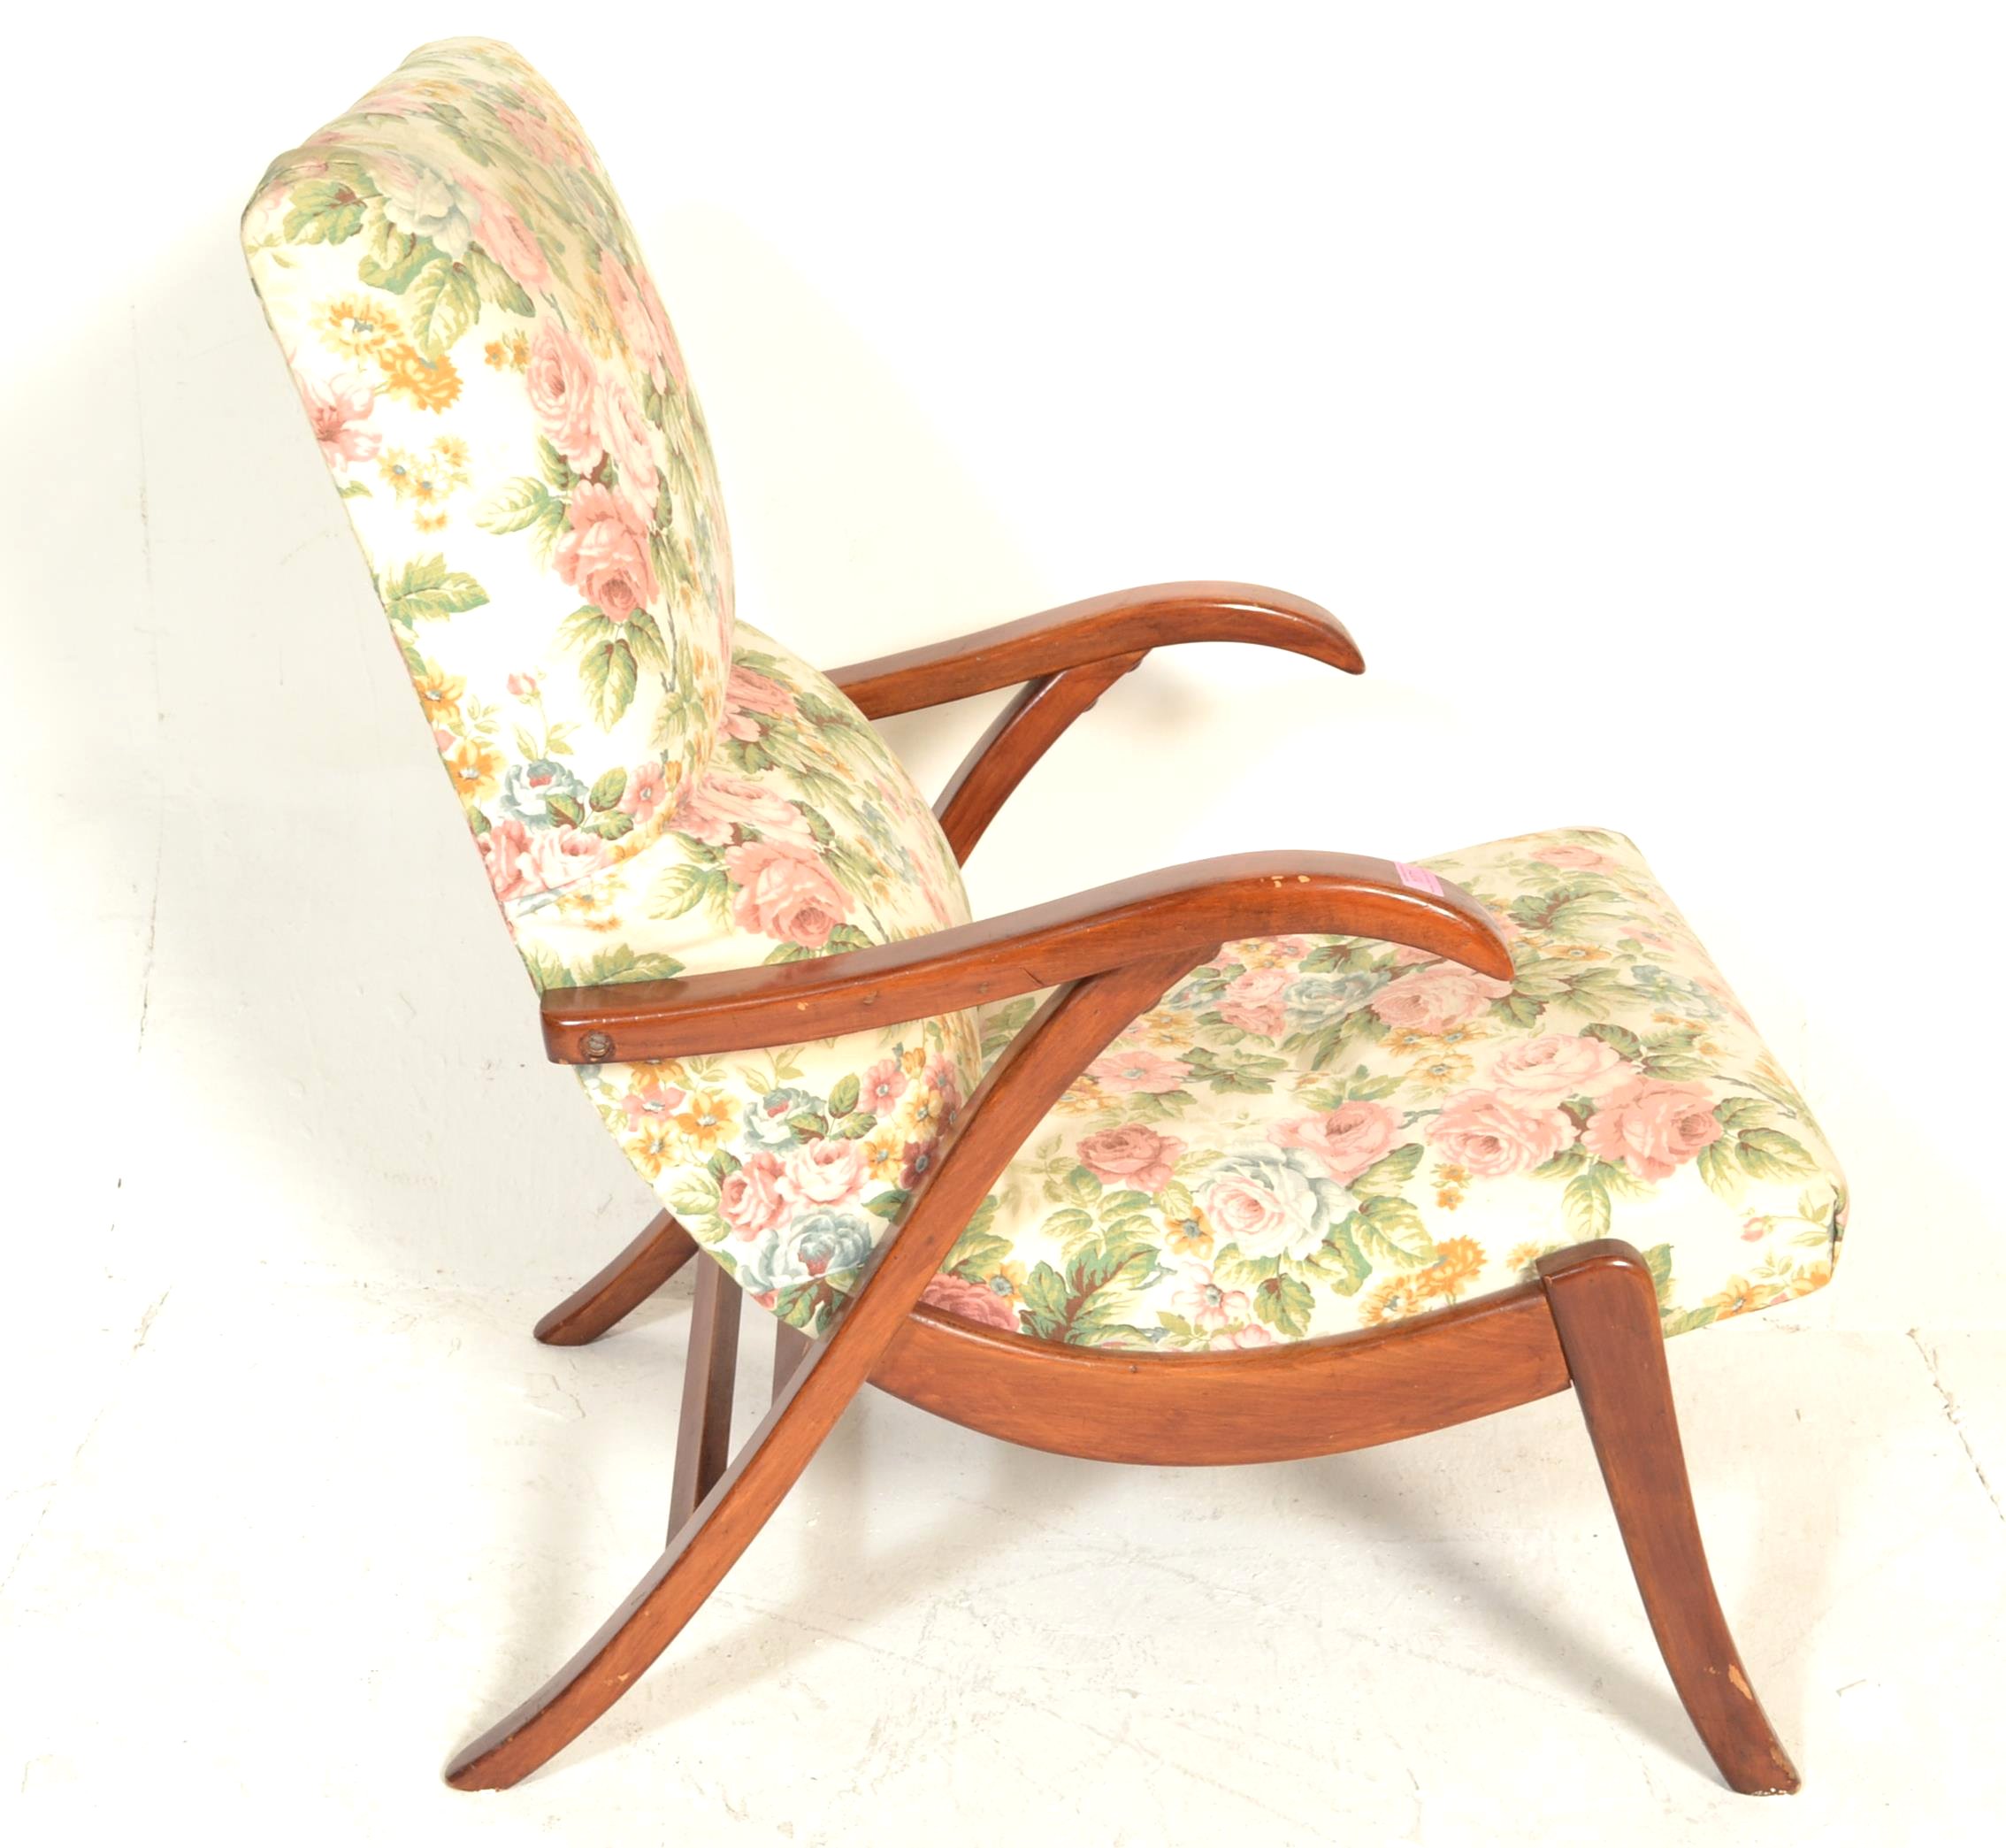 UNUSUAL MID 20TH CENTURY RETRO EASY / LOUNGE CHAIR / ARMCHAIR - Image 4 of 5